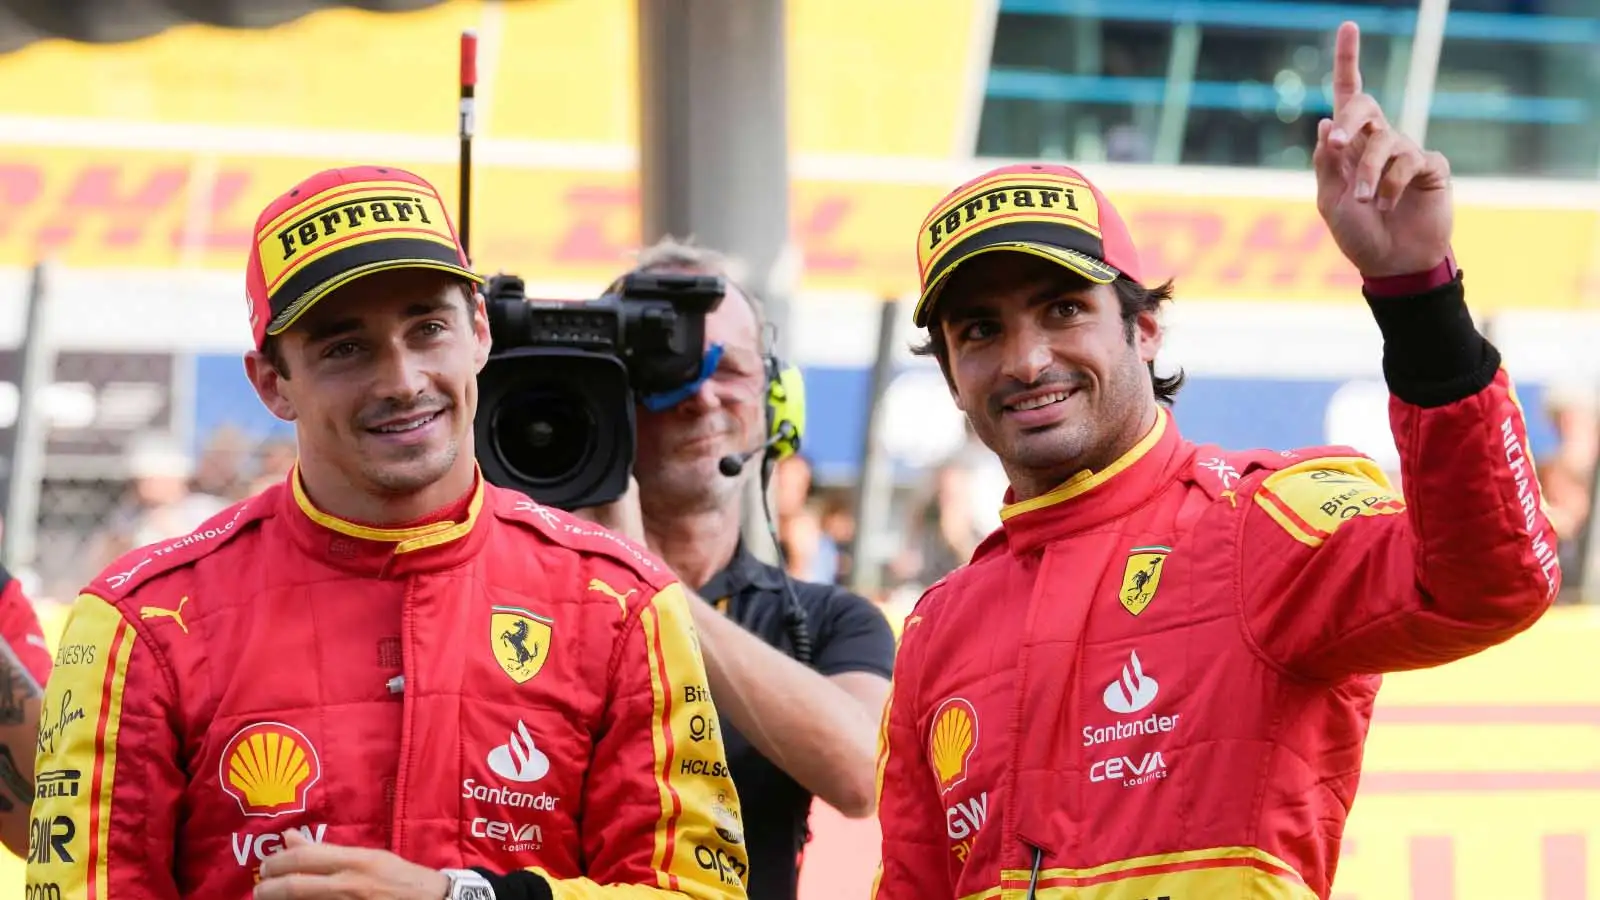 Ferrari duo Charles Leclerc and Carlos Sainz after qualifying at Monza. F1 starting grid